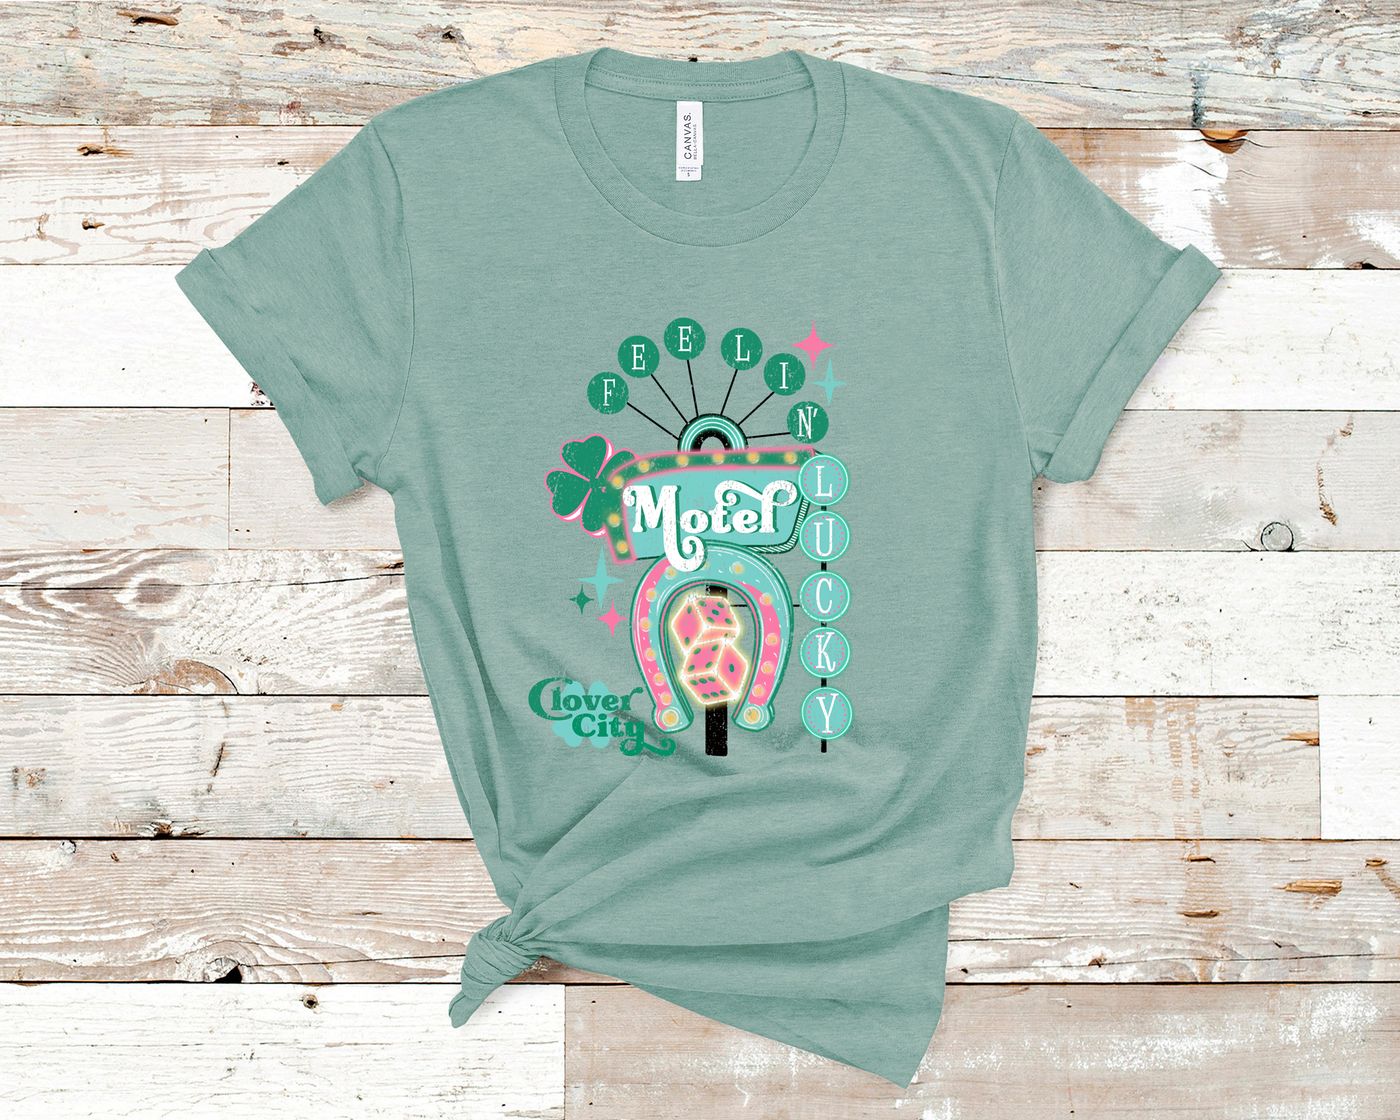 Dusty Blue Tee. Graphic of a vintage Neon Sign The word feeling with each letter in green circles at the top with the word lucky down the side with each letter in a turquoise circle. There is a sign in the center with the word motel in it, underneath there is a horse shoe with dice inside at he bottom of the sign. There is also a four leaf clover with the word clover city over it in green.